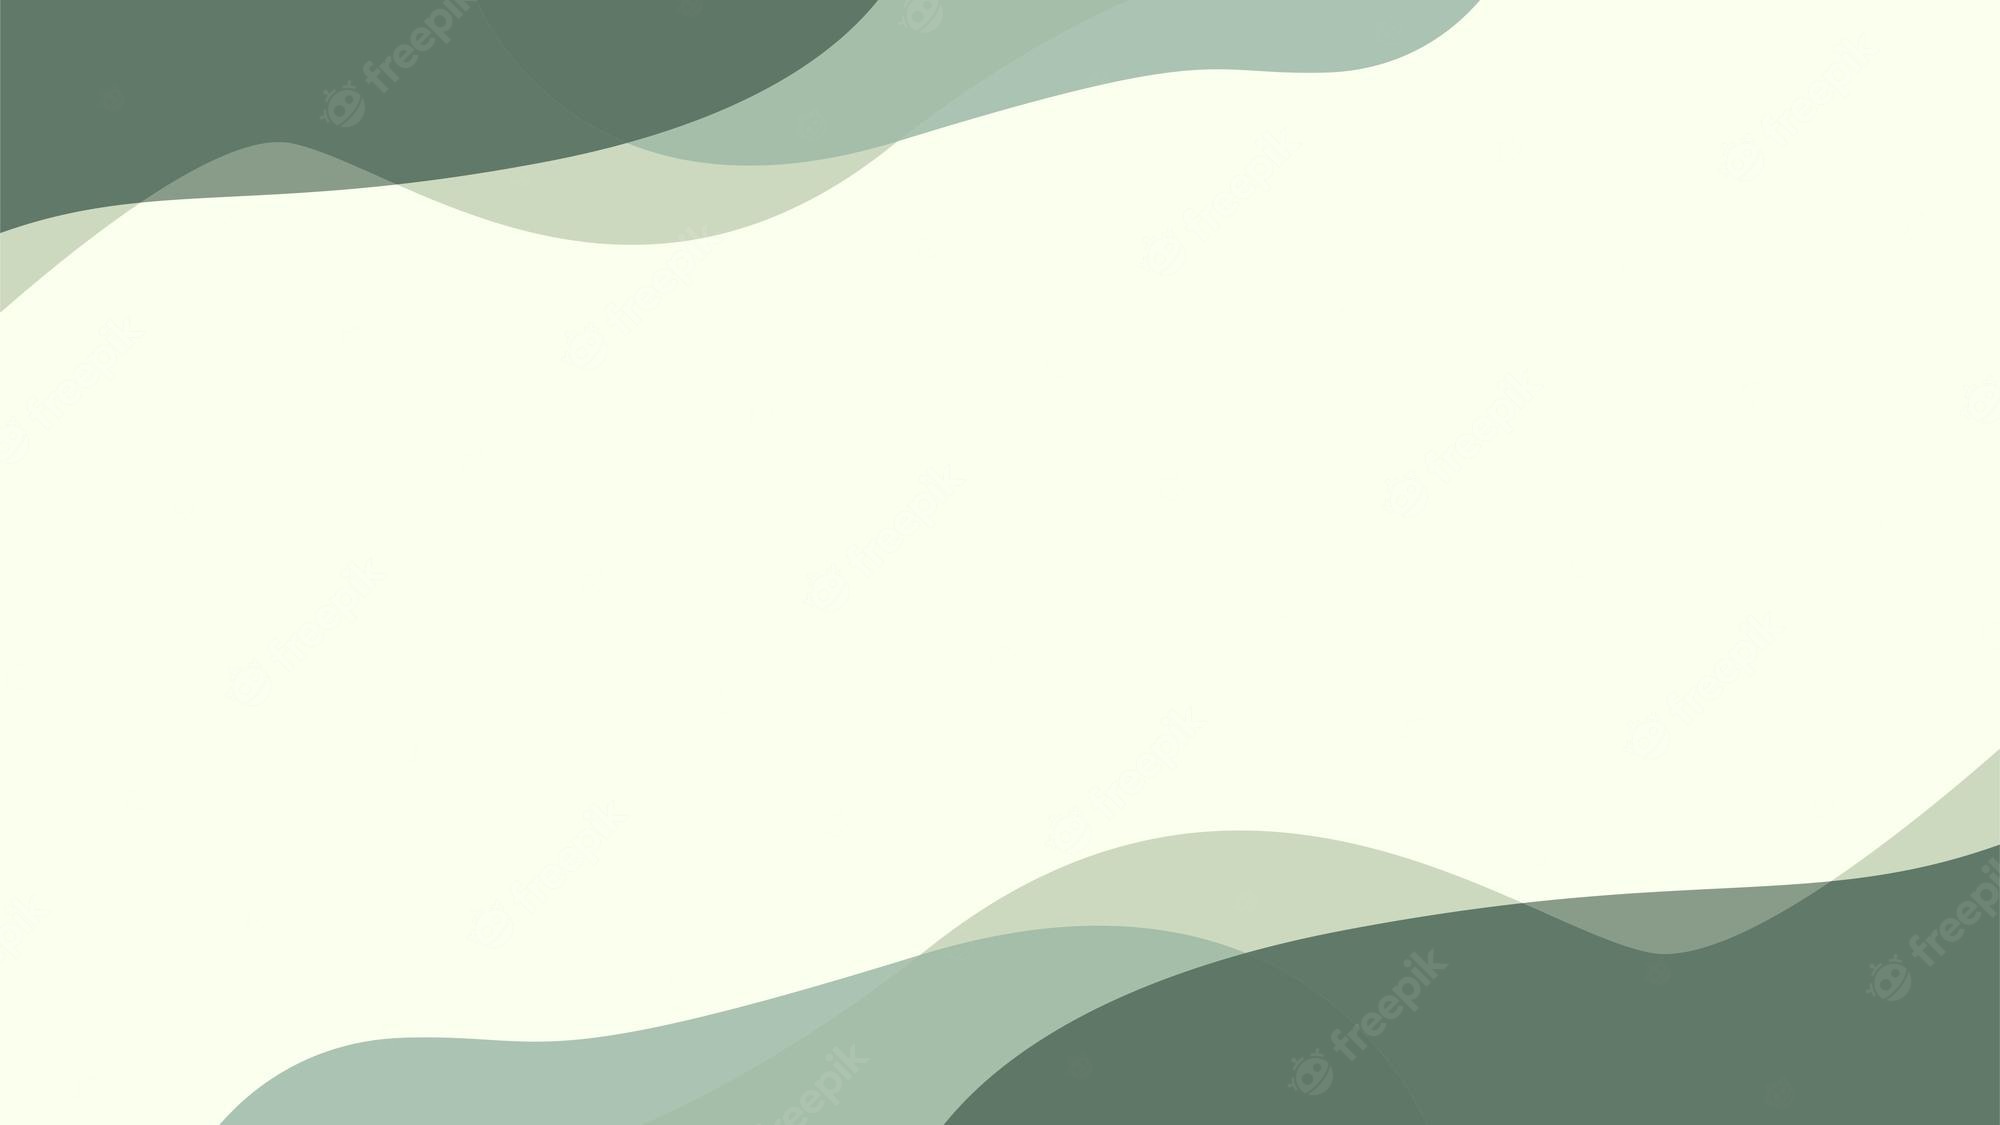 Download Free 100 + background sage green aesthetic